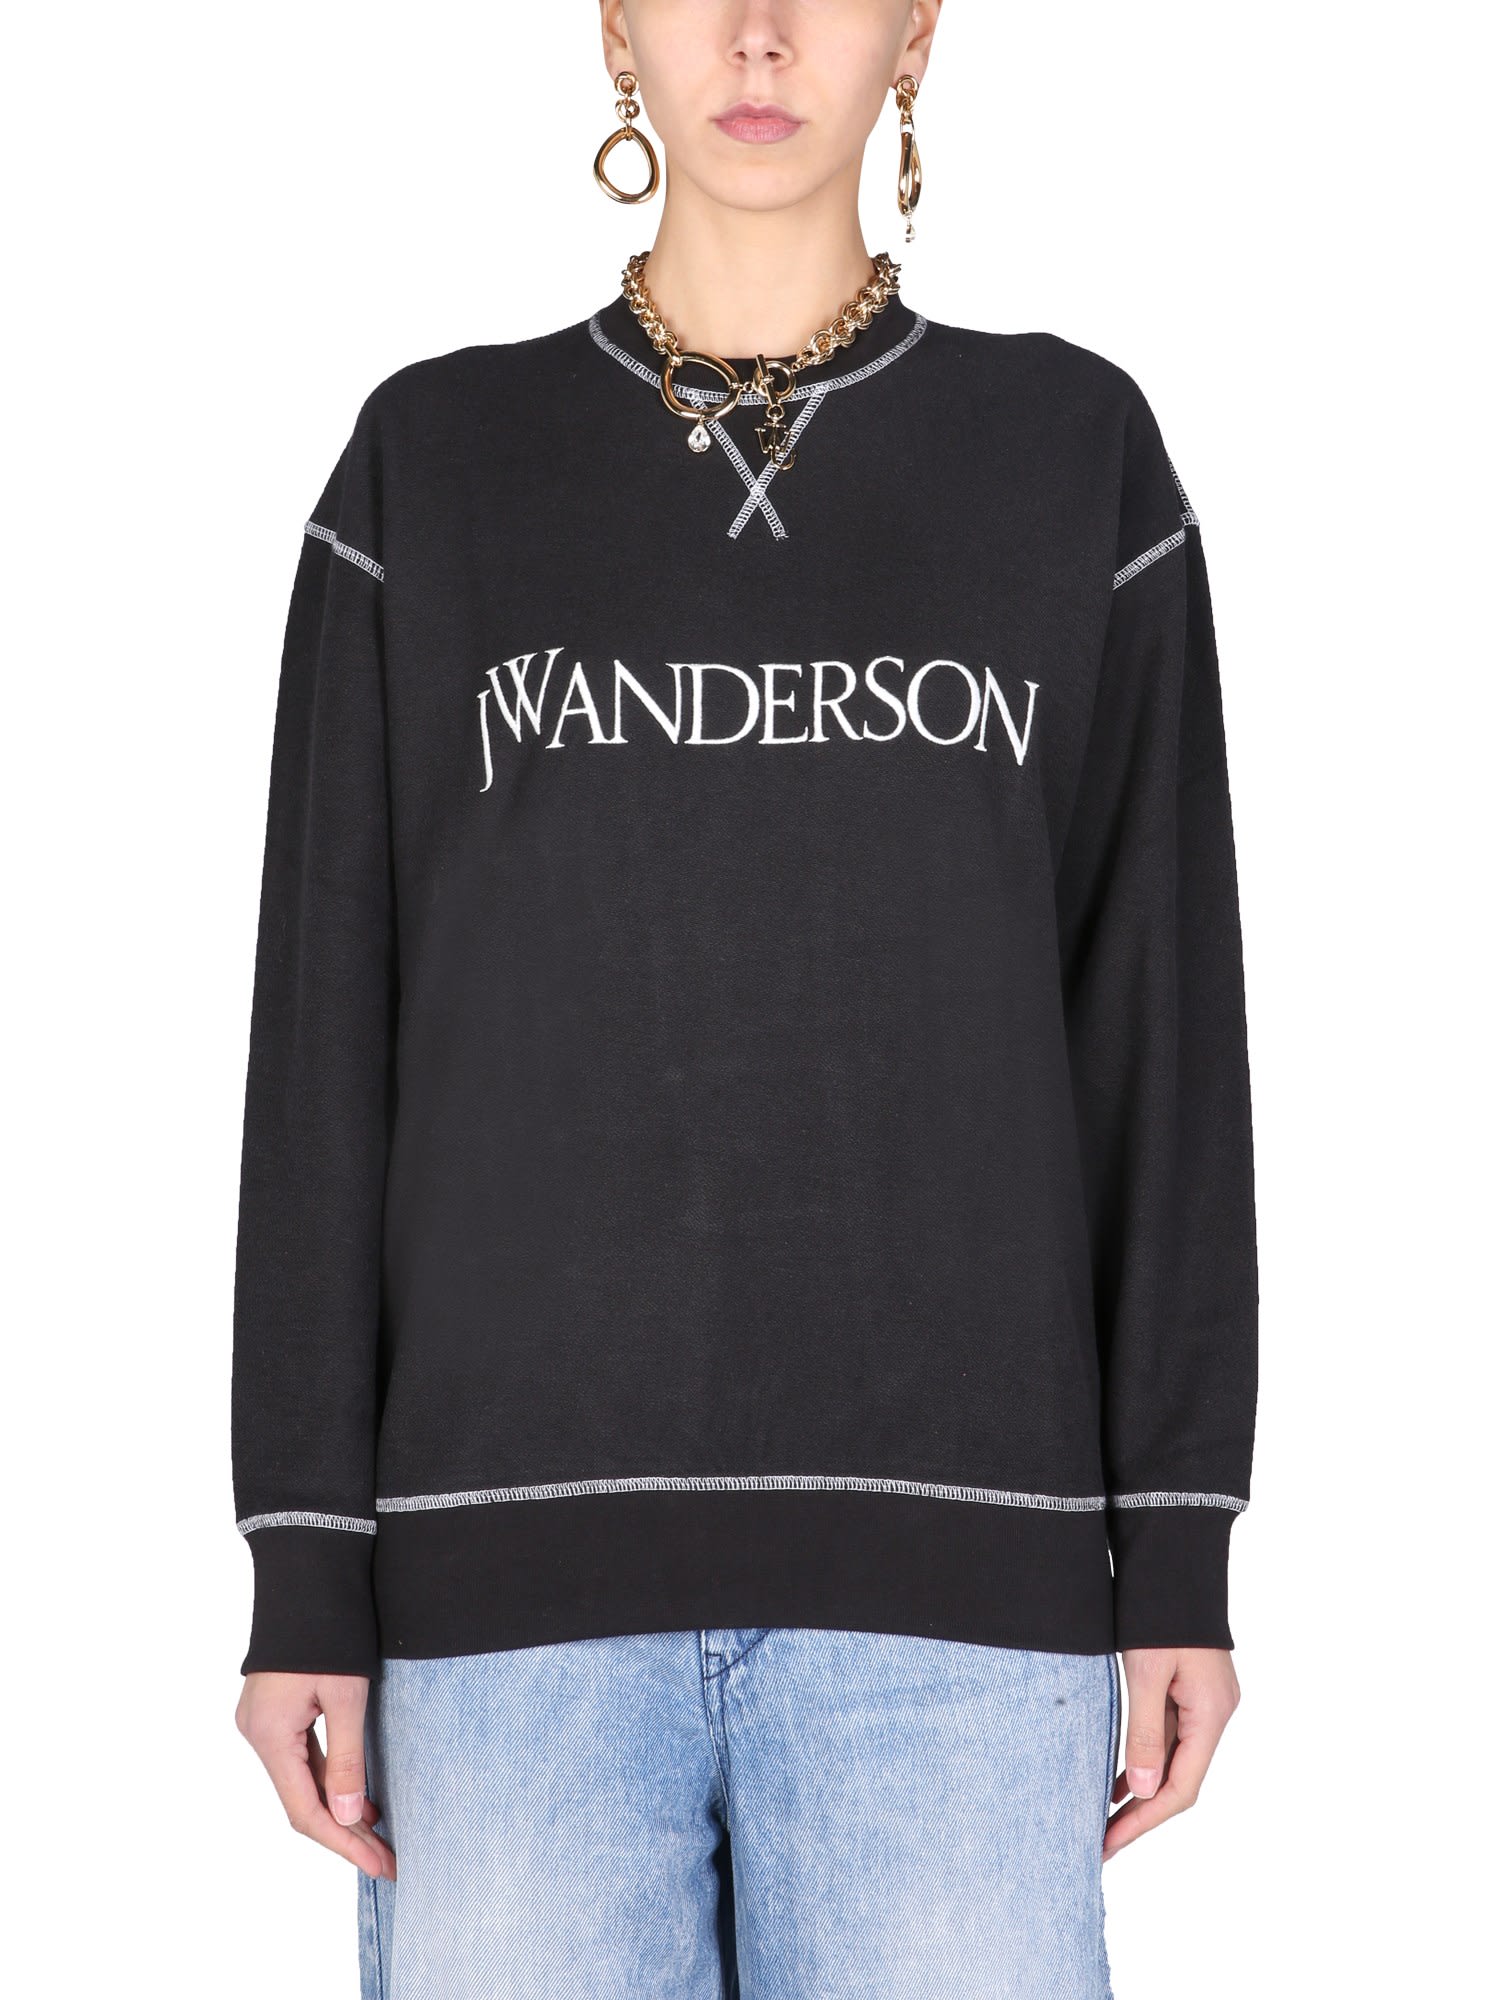 J.W. Anderson Sweatshirt With Embroidered Logo